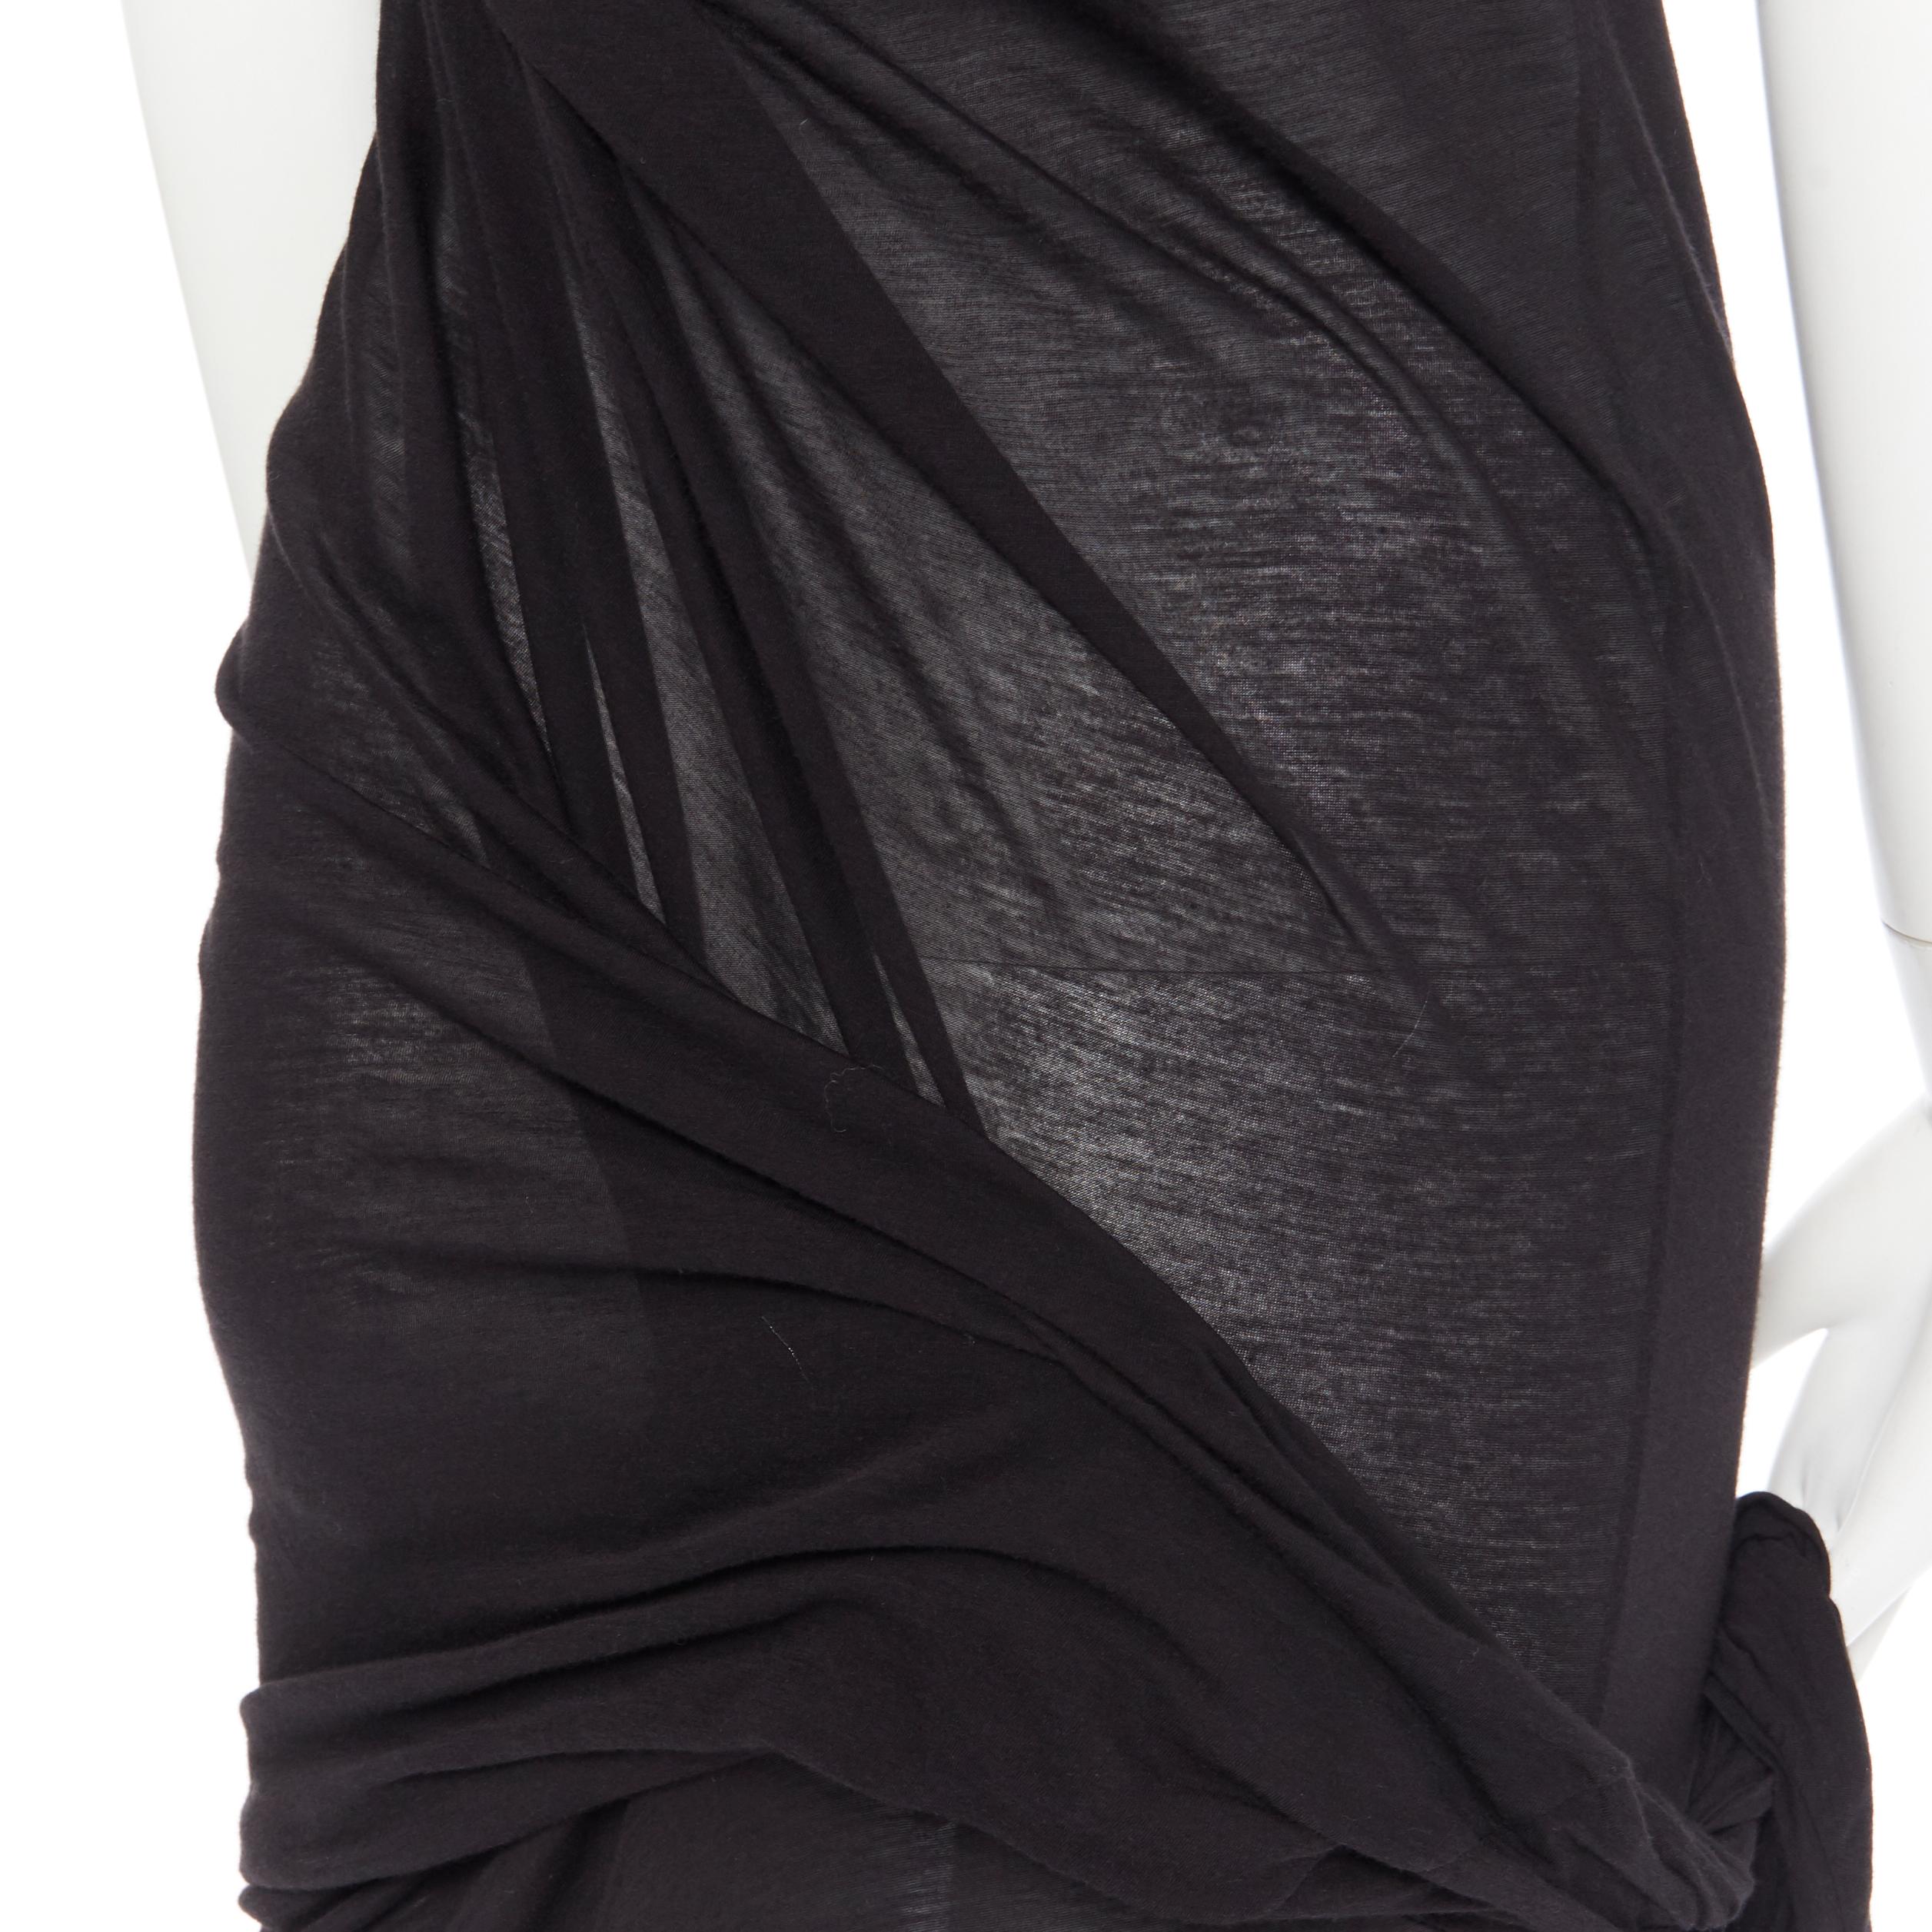 new DRKSHDW RICK OWENS black cotton jersey tie knot drape bias maxi dress M
Brand: Rick Owens
Designer: Rick Owens
Collection: Spring Summer 2018
Model Name / Style: Tie Knot dress
Material: Cotton
Color: Black
Pattern: Solid
Extra Detail: Fine